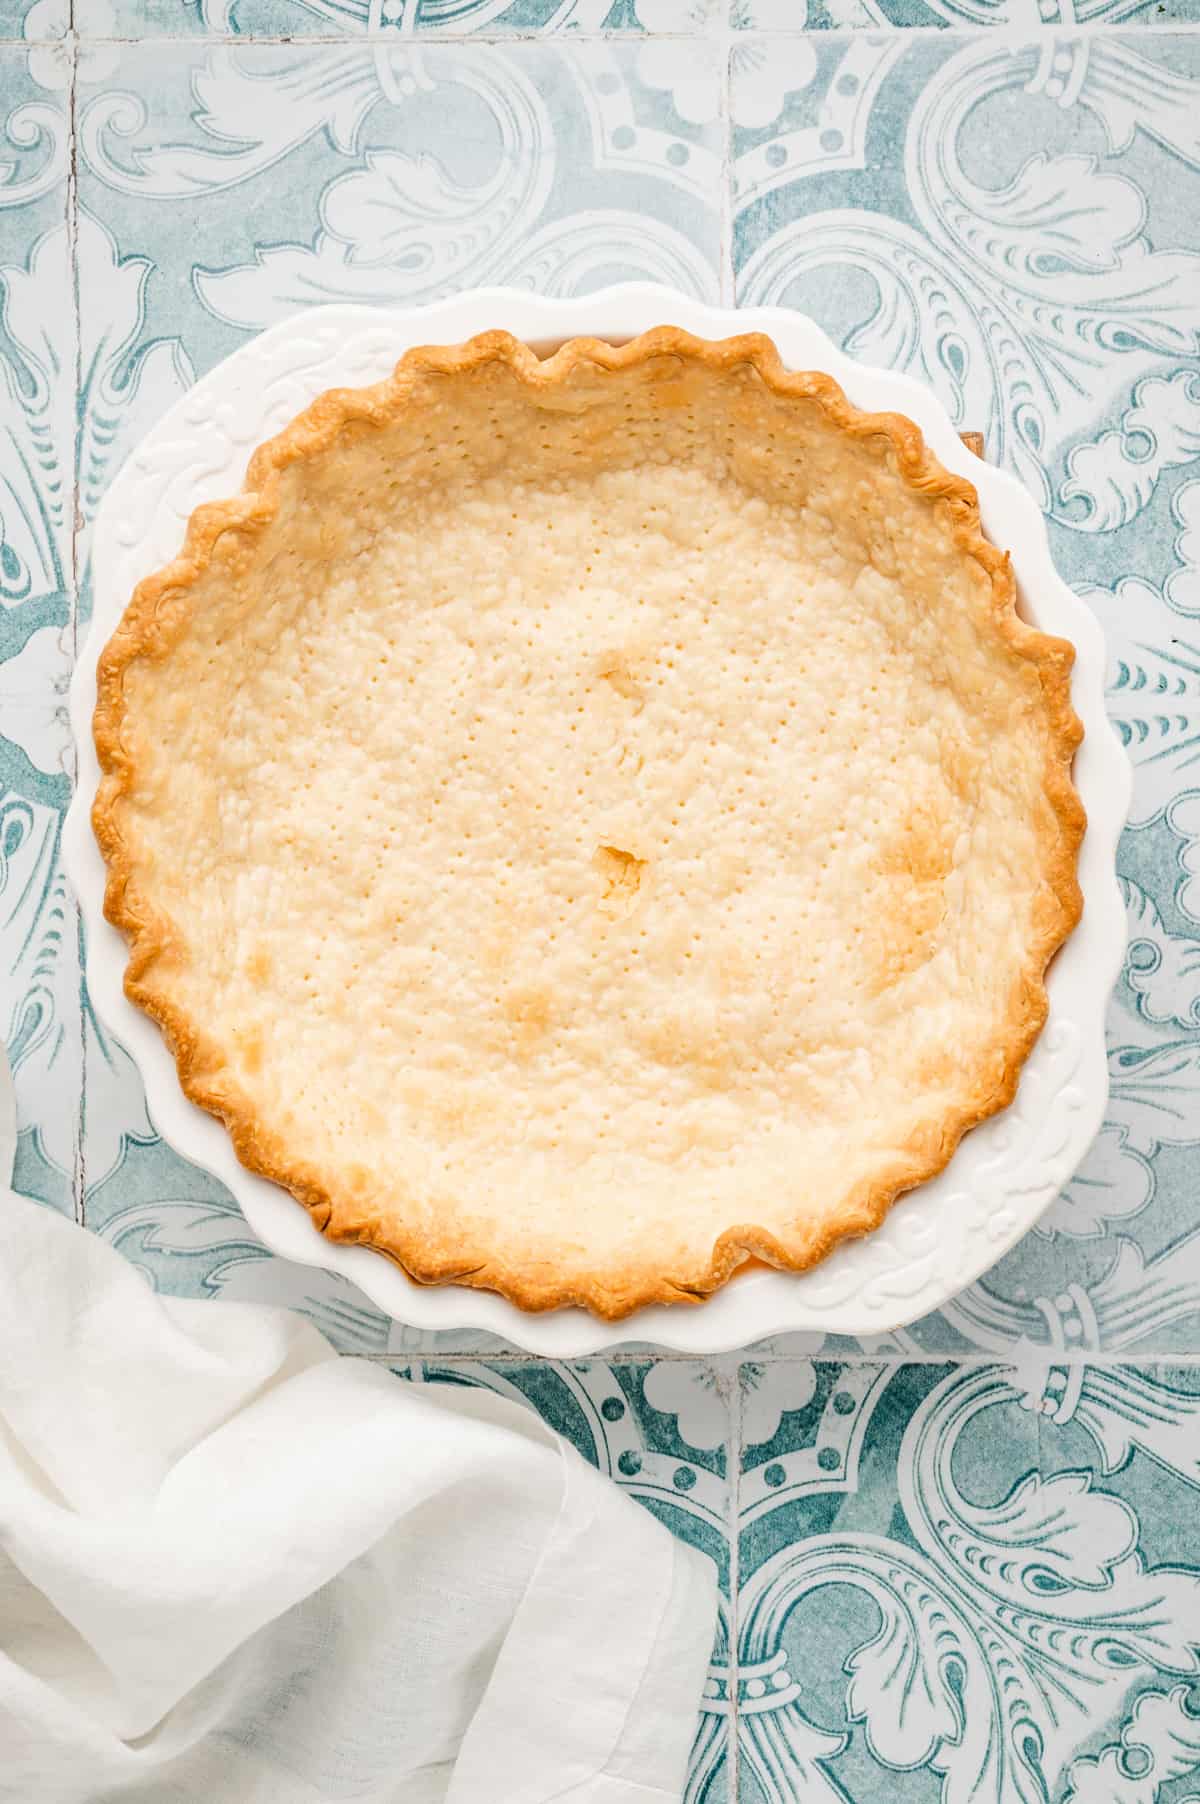 Pie crust in pie pan baked to a golden brown for Easy Strawberry Pie